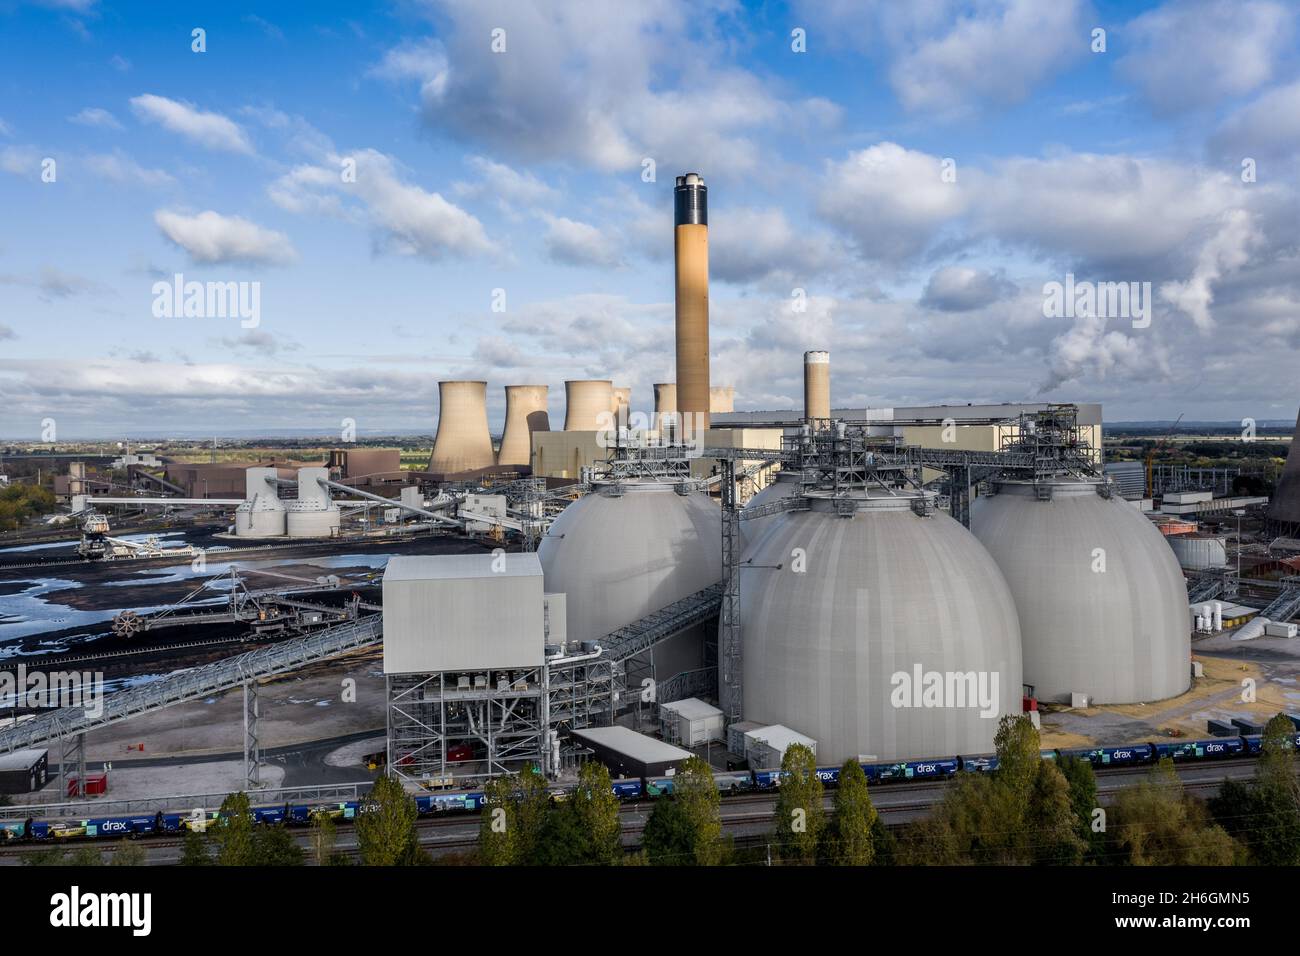 DRAX POWER STATION, YORKSHIRE, UK - NOVEMBER 4, 2021.  An aerial panorama view of Drax Power Station showing Biomass stortage tanks and carbon capture Stock Photo